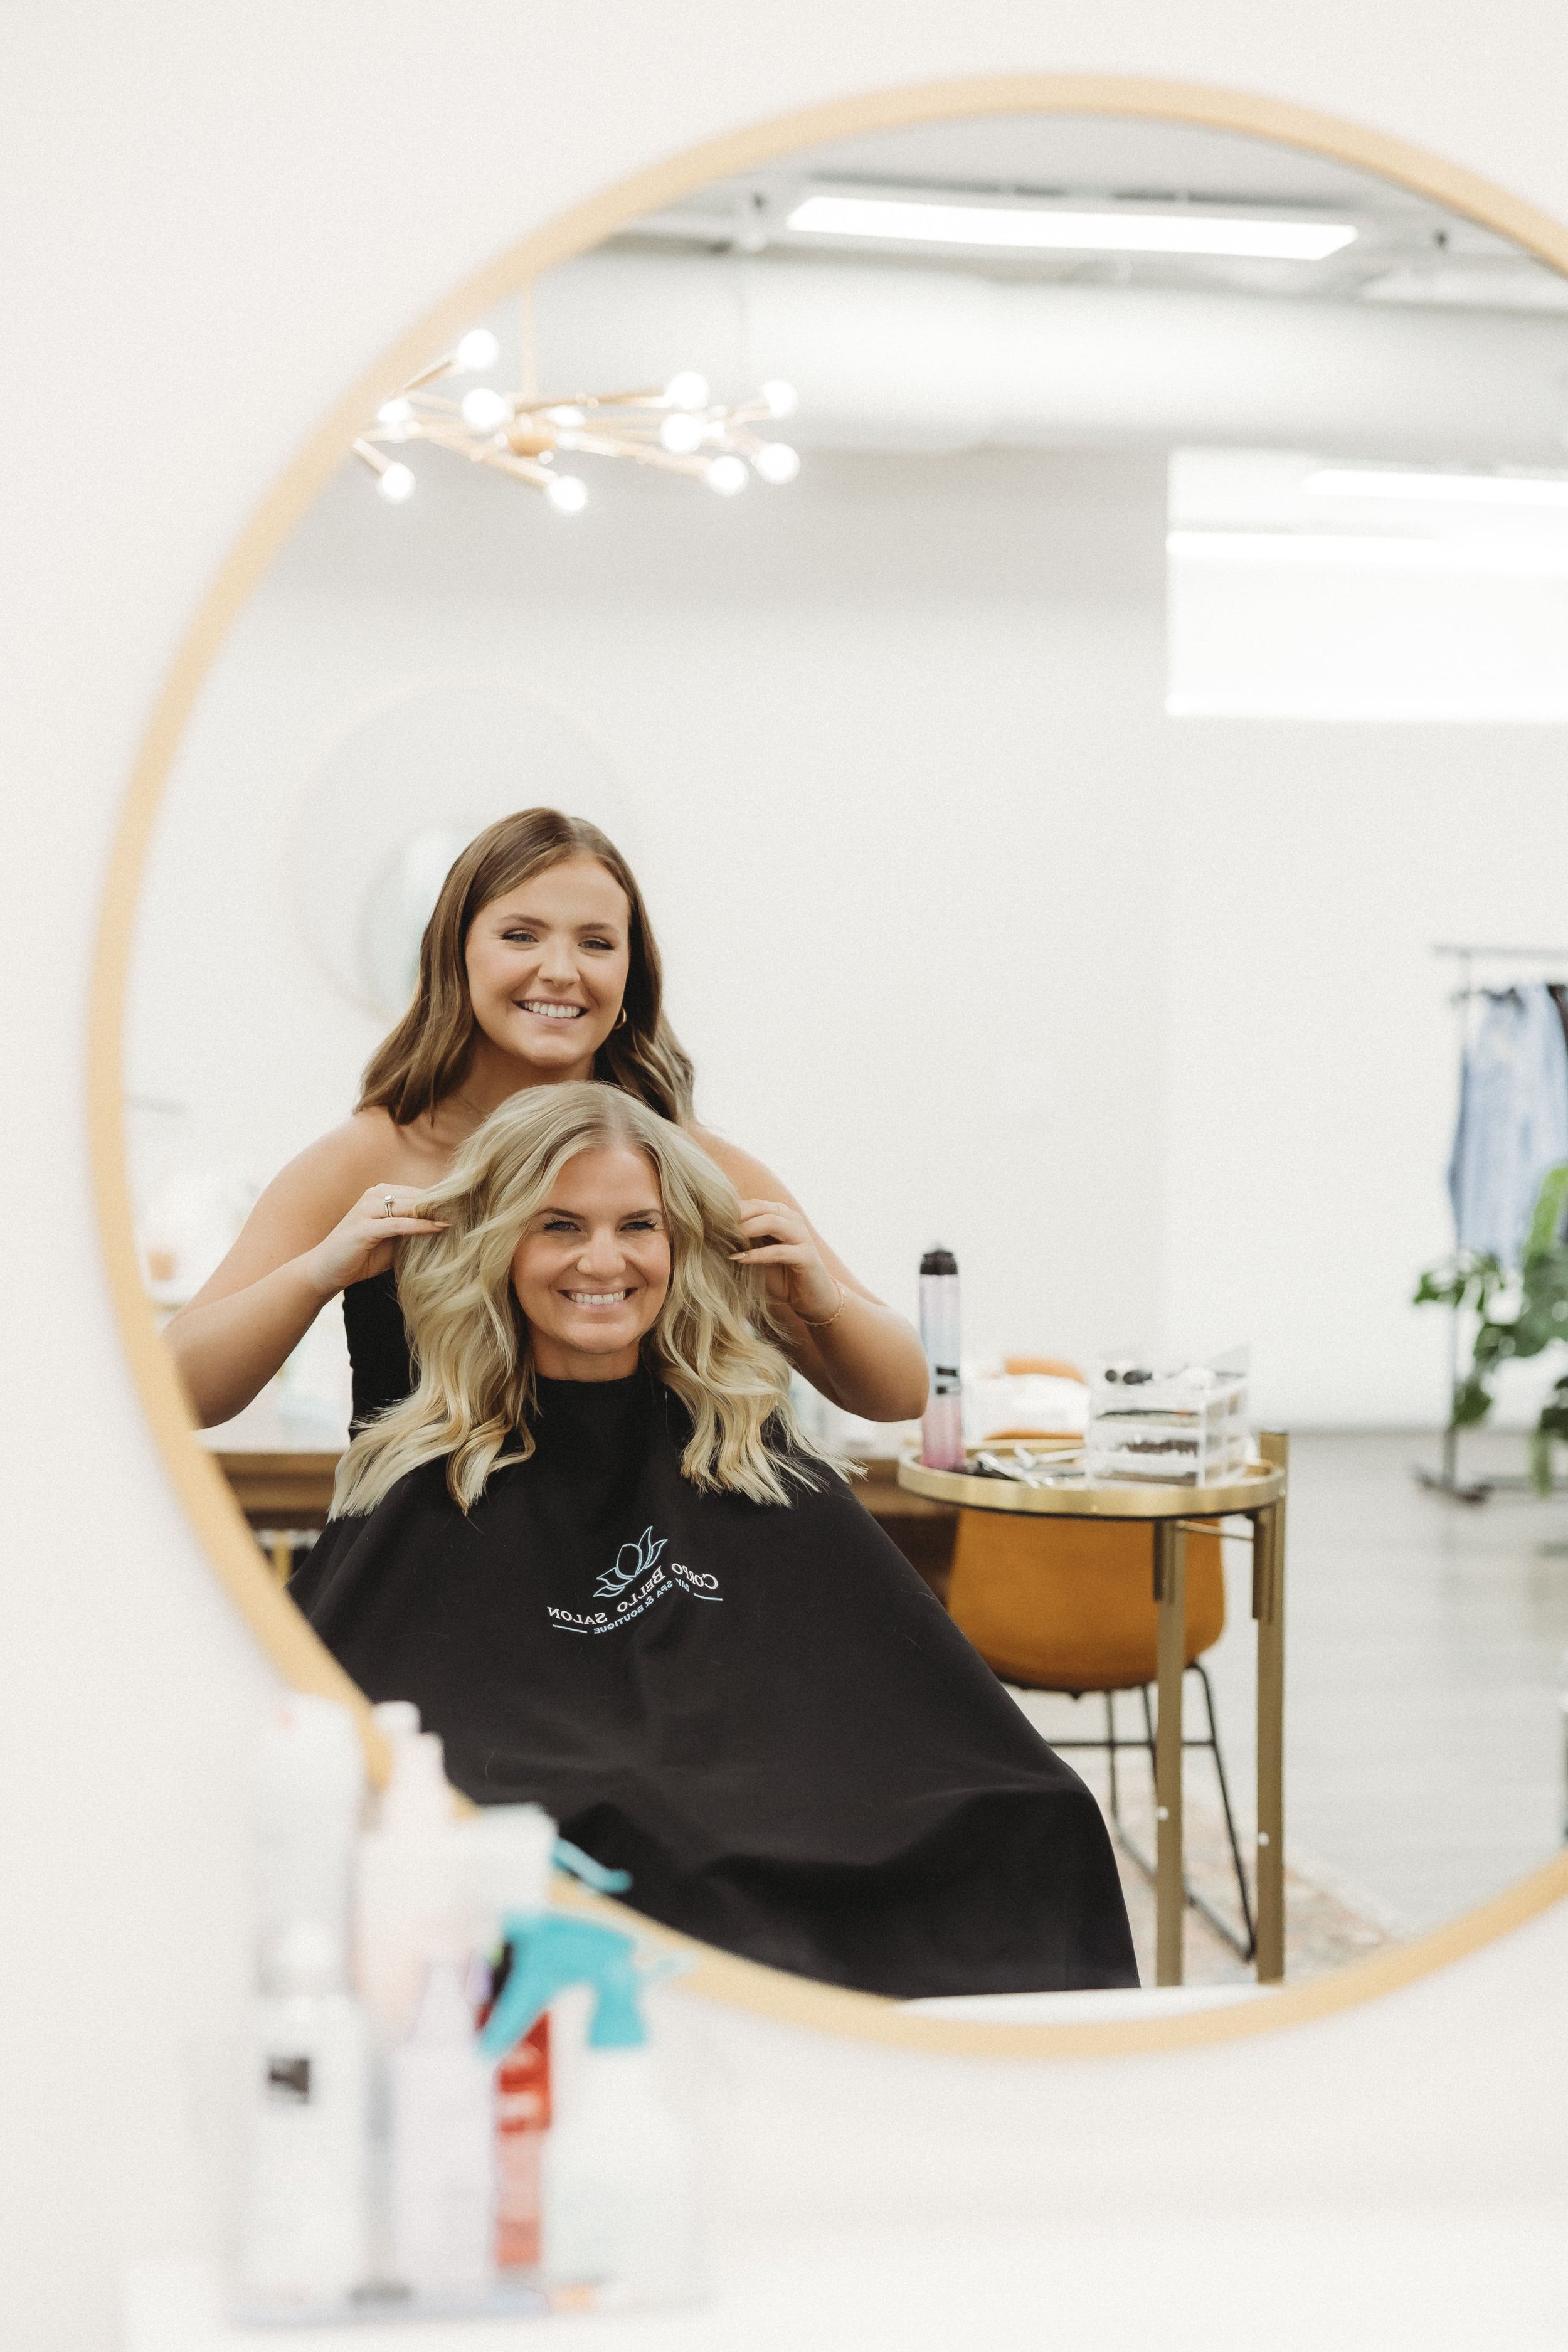  a hair stylist and her client smile together as she fluffs her hair during a stylist photoshoot 